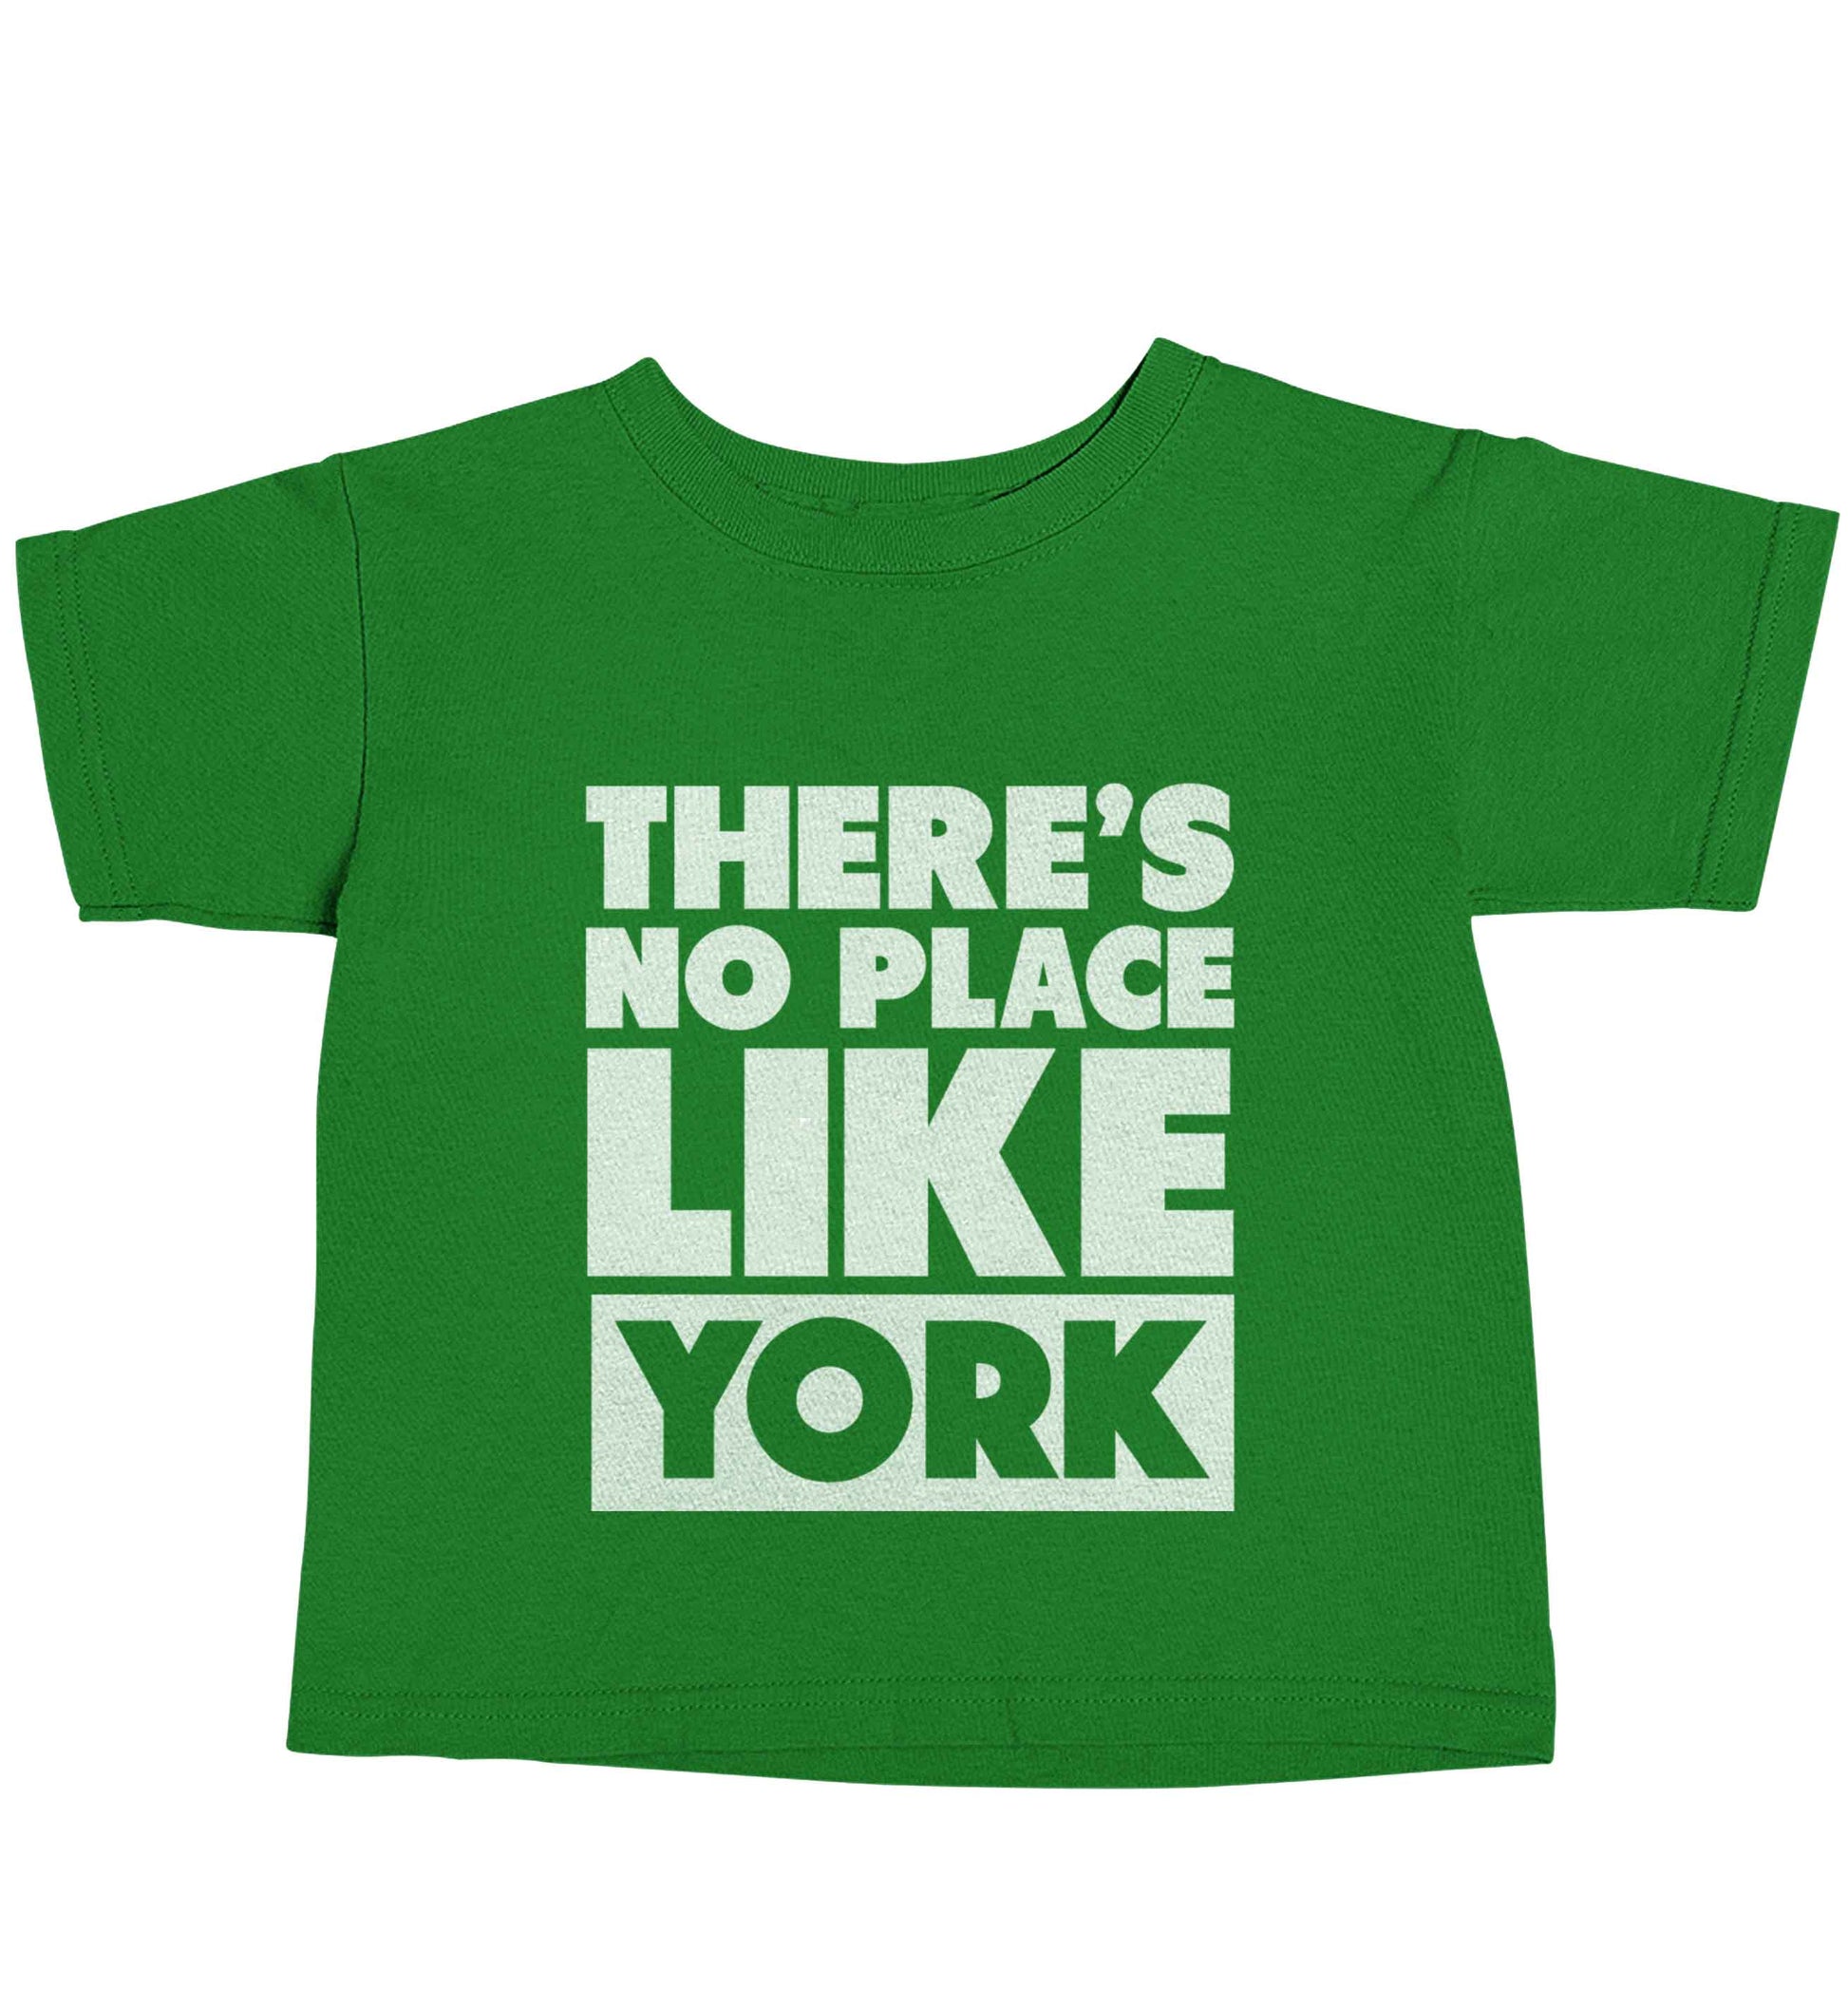 There's no place like york green baby toddler Tshirt 2 Years